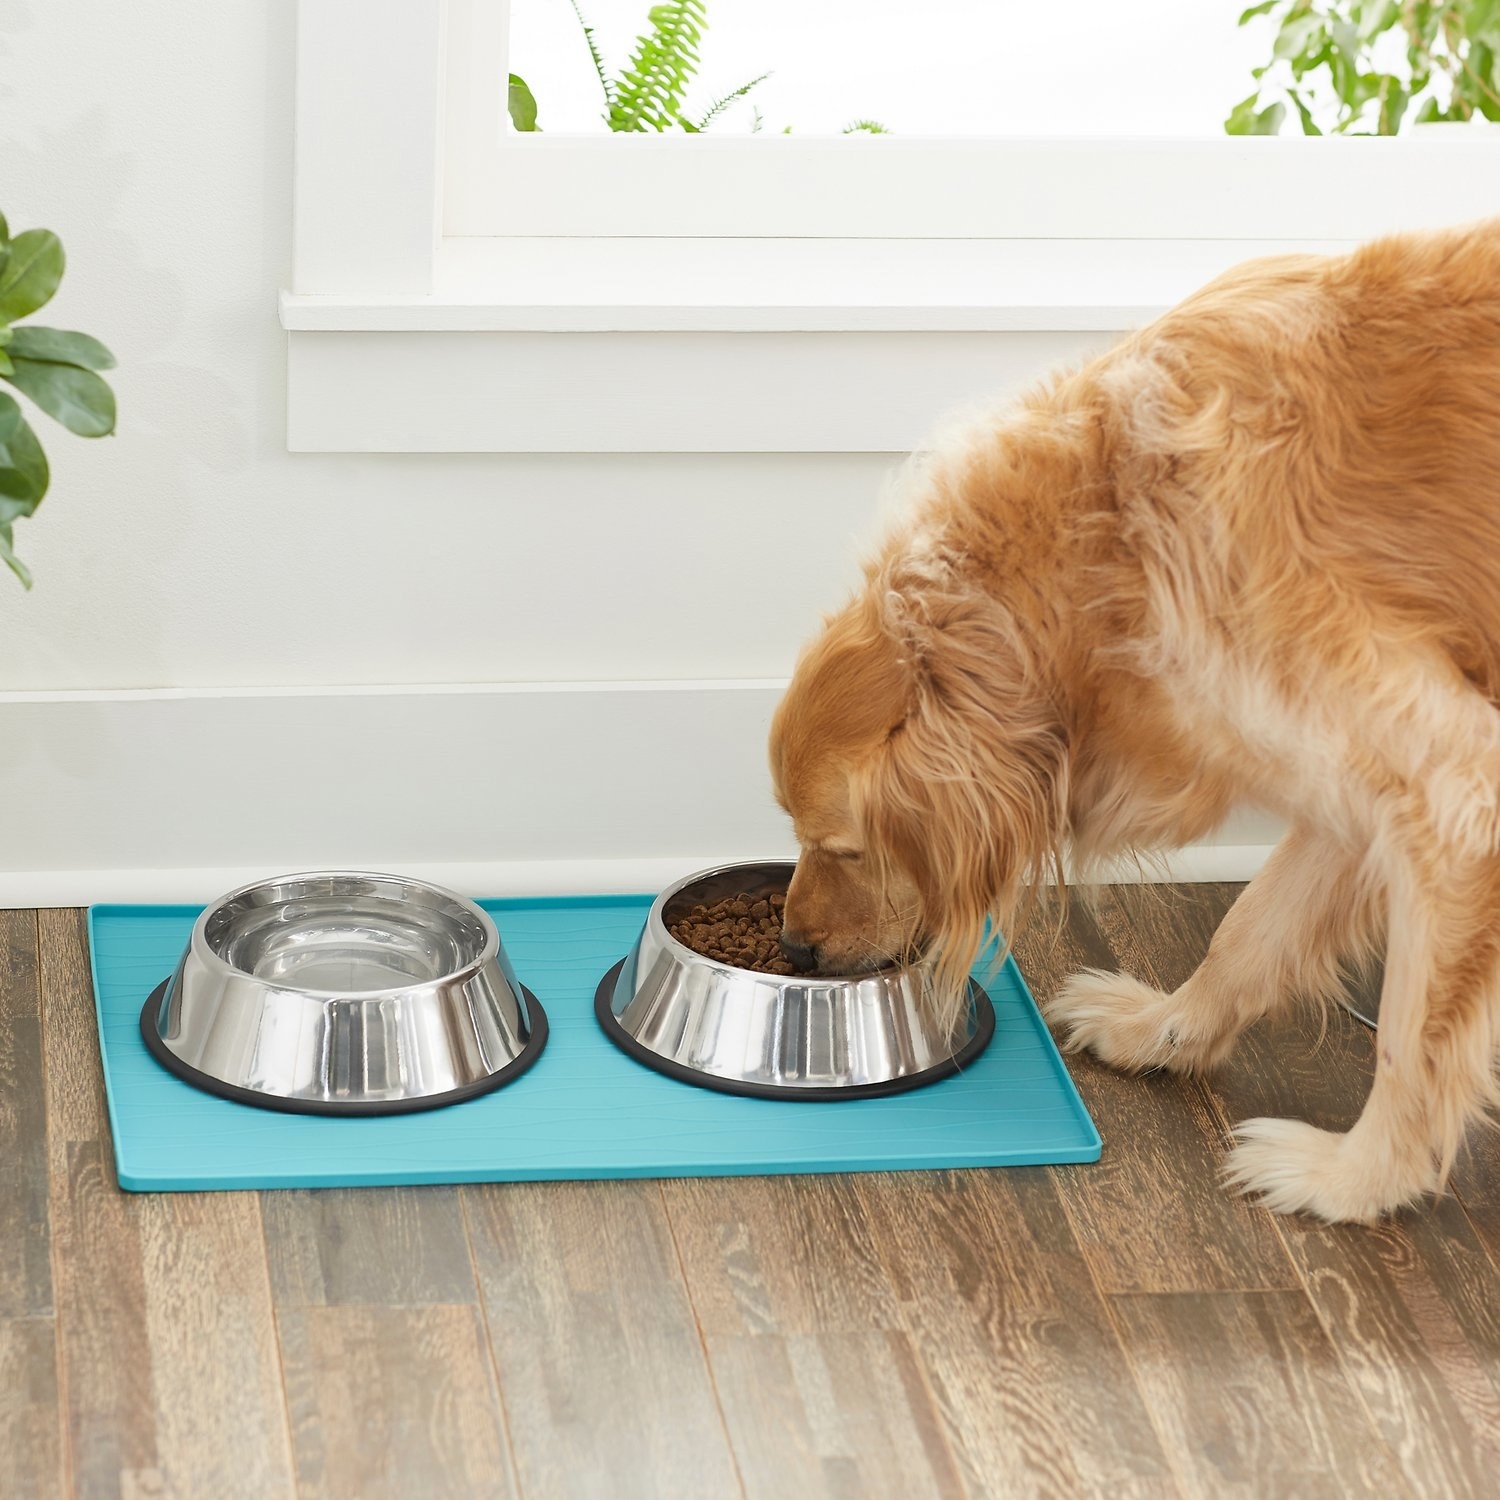 A dog eating kibble out of a bowl on the teal mat